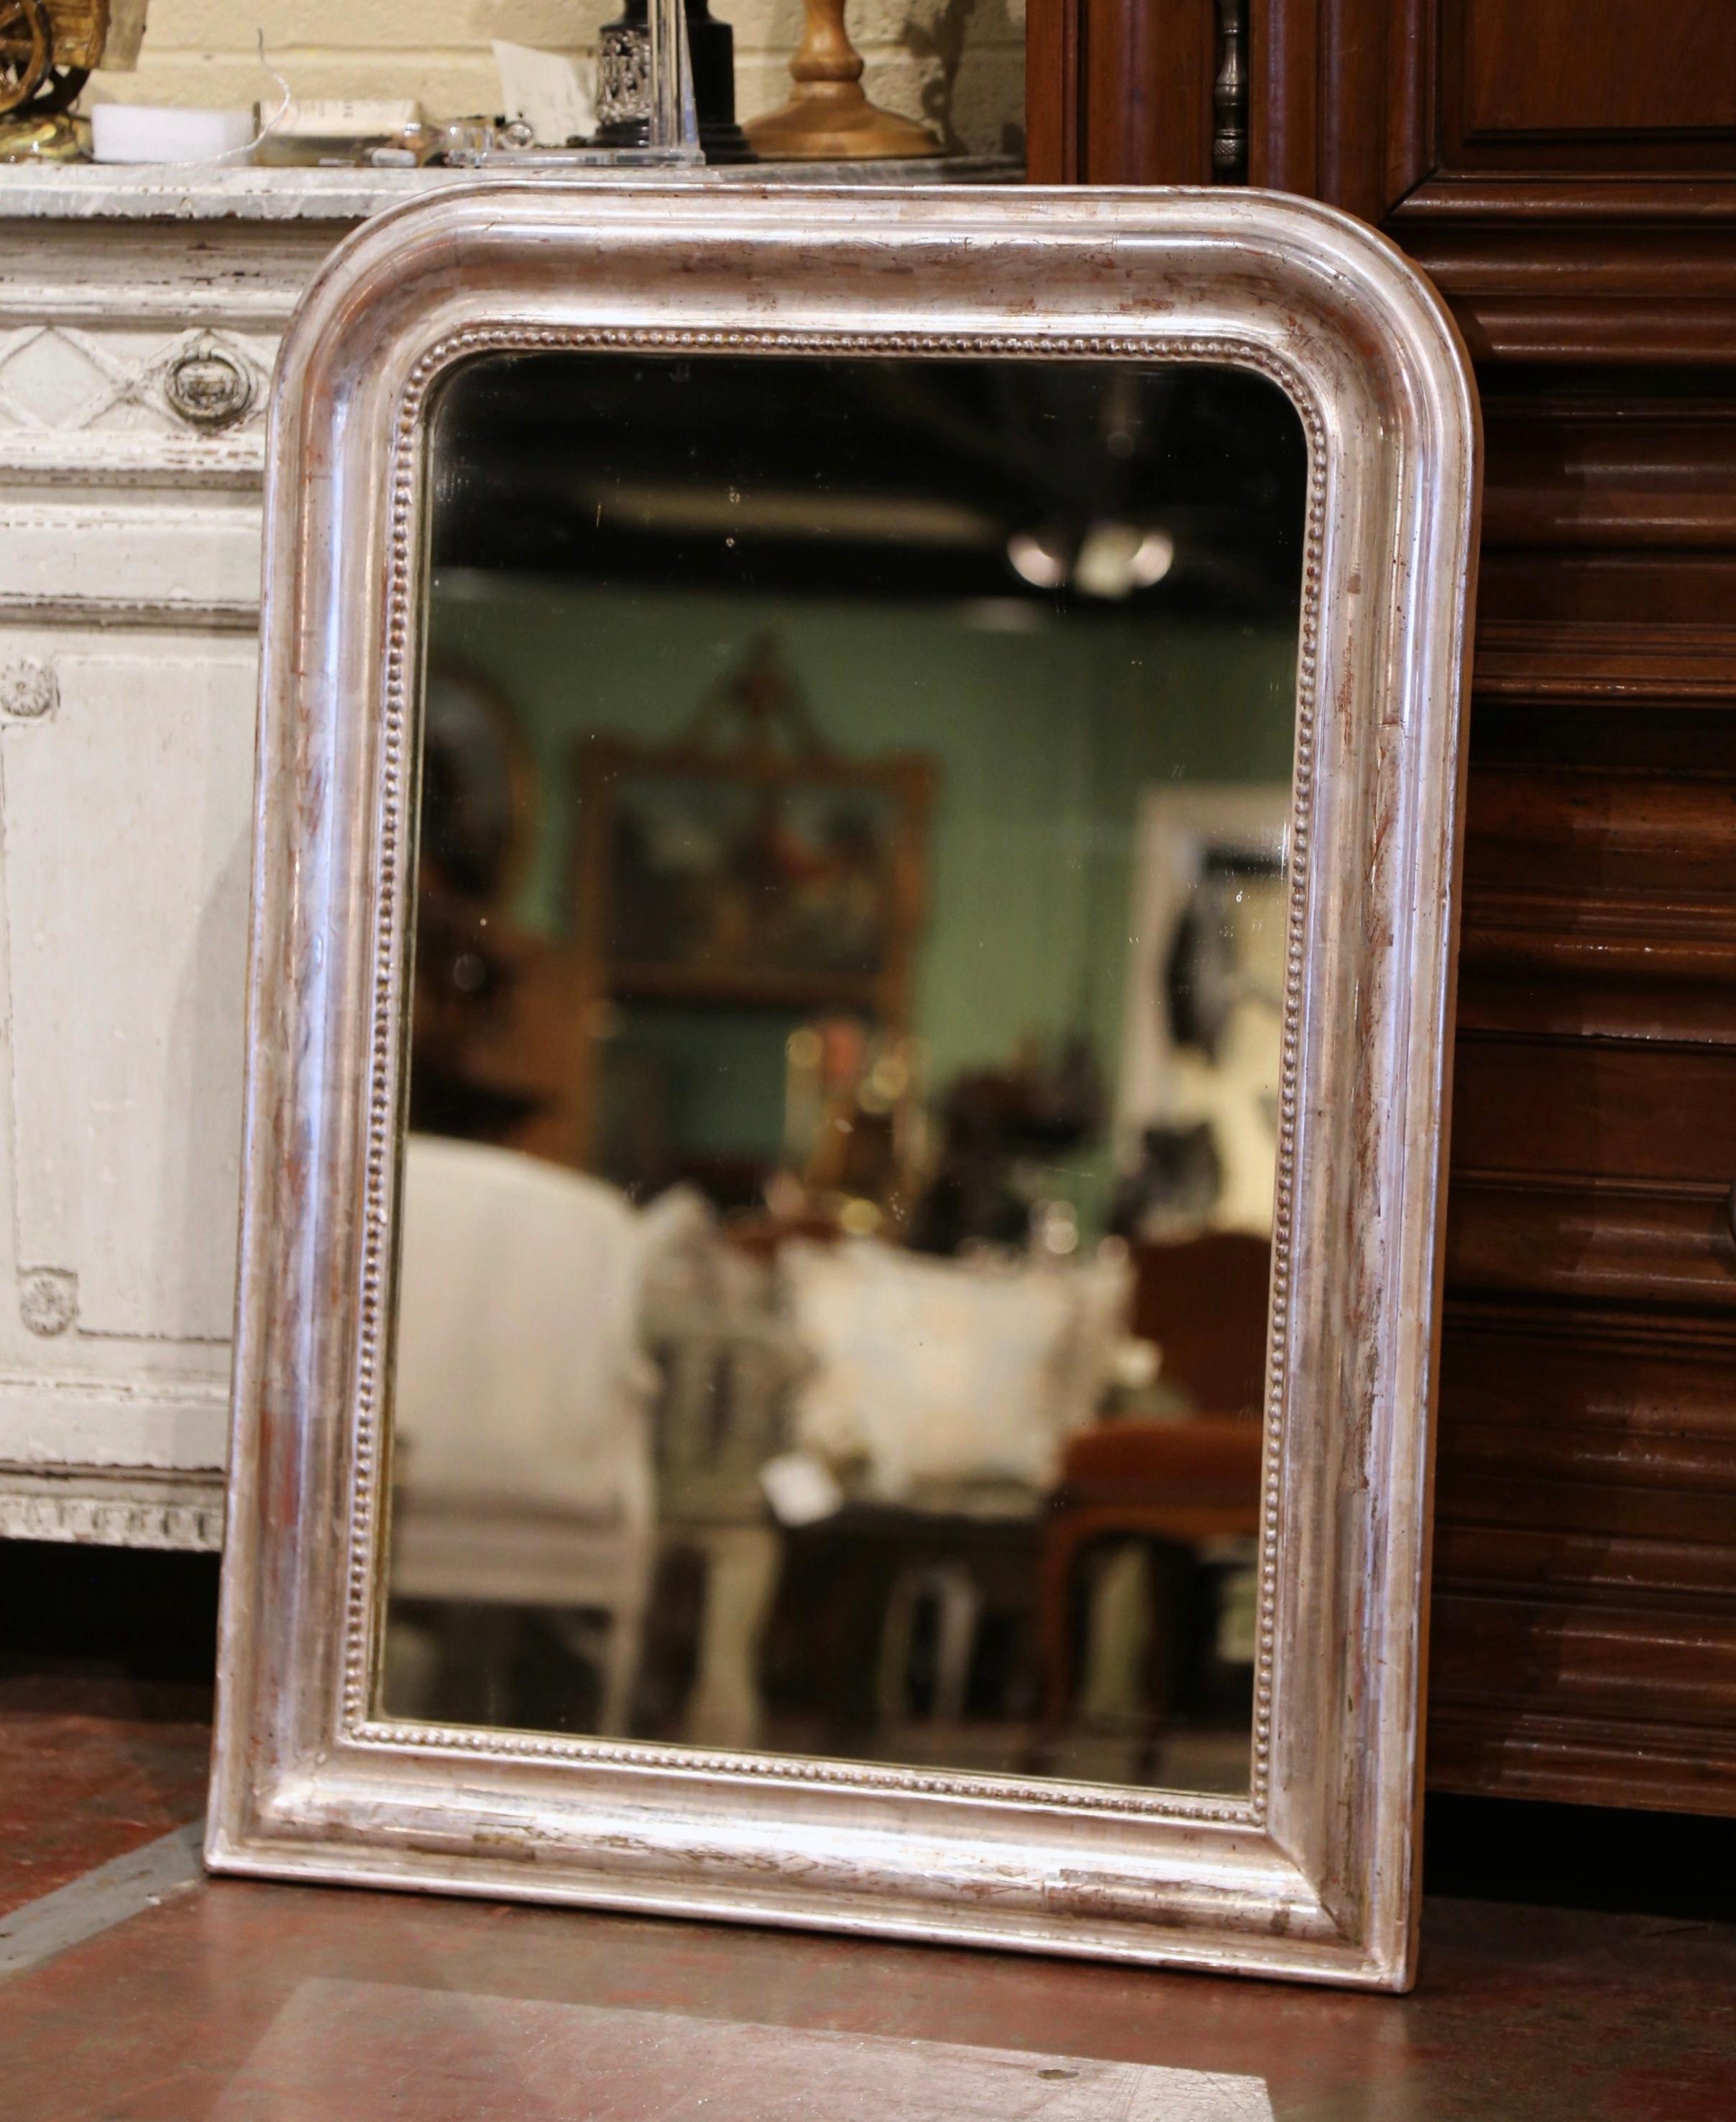 Crafted in the Burgundy region of France, circa 1870, the rectangular wall mirror has traditional, timeless lines with rounded corners. The frame is decorated with a luxurious silver leaf finish, further embellished with carved bead decor around the